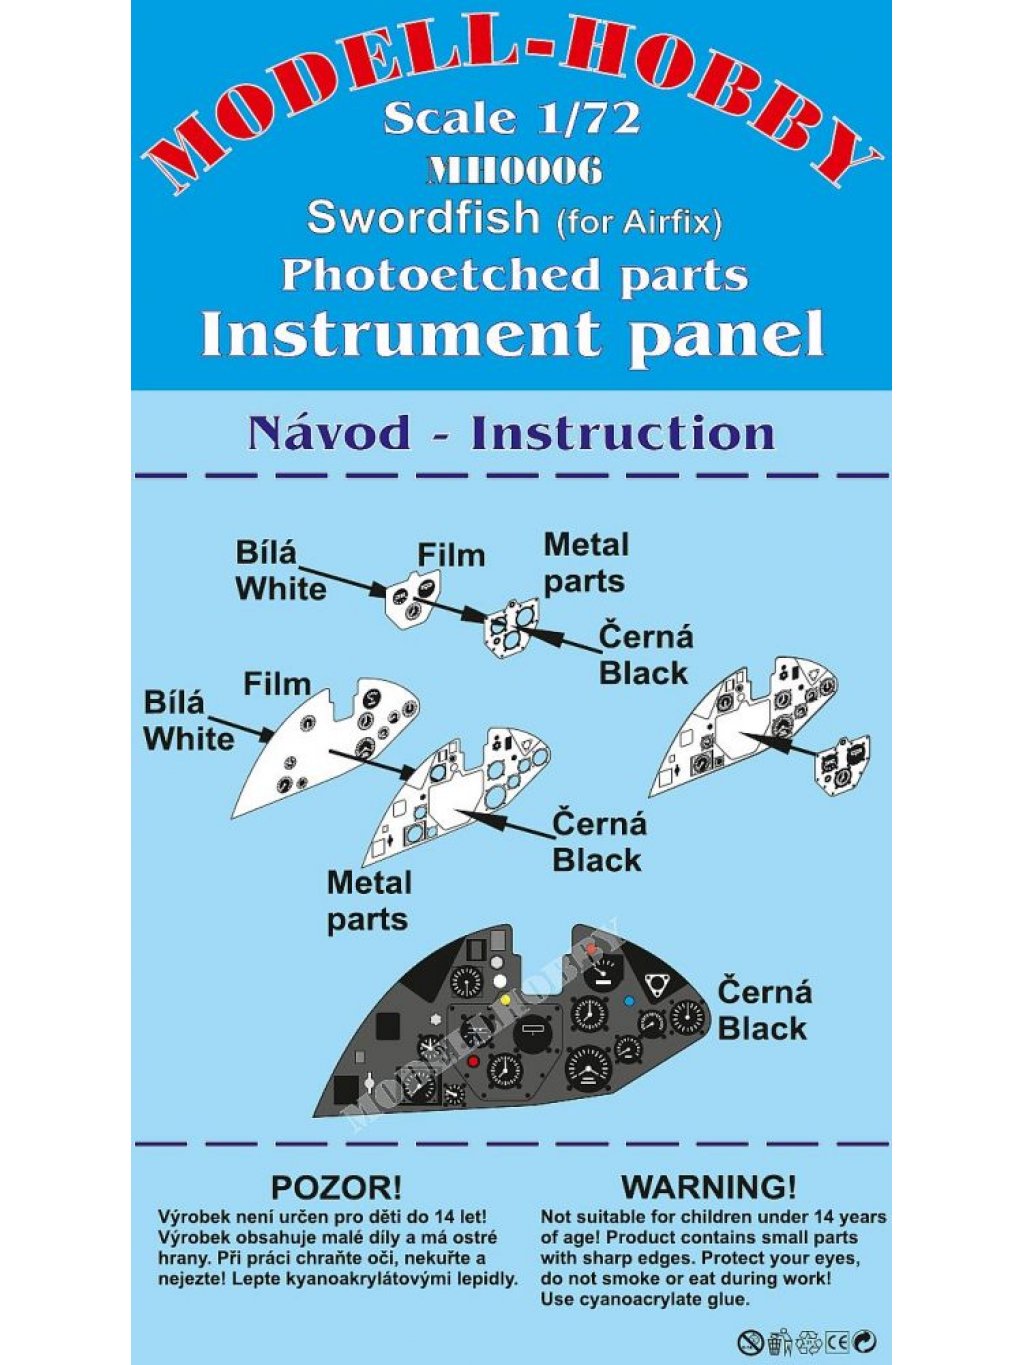 Fairey Swordfish Photoetched parts instrument panel for Airfix ex Modell-Hobby